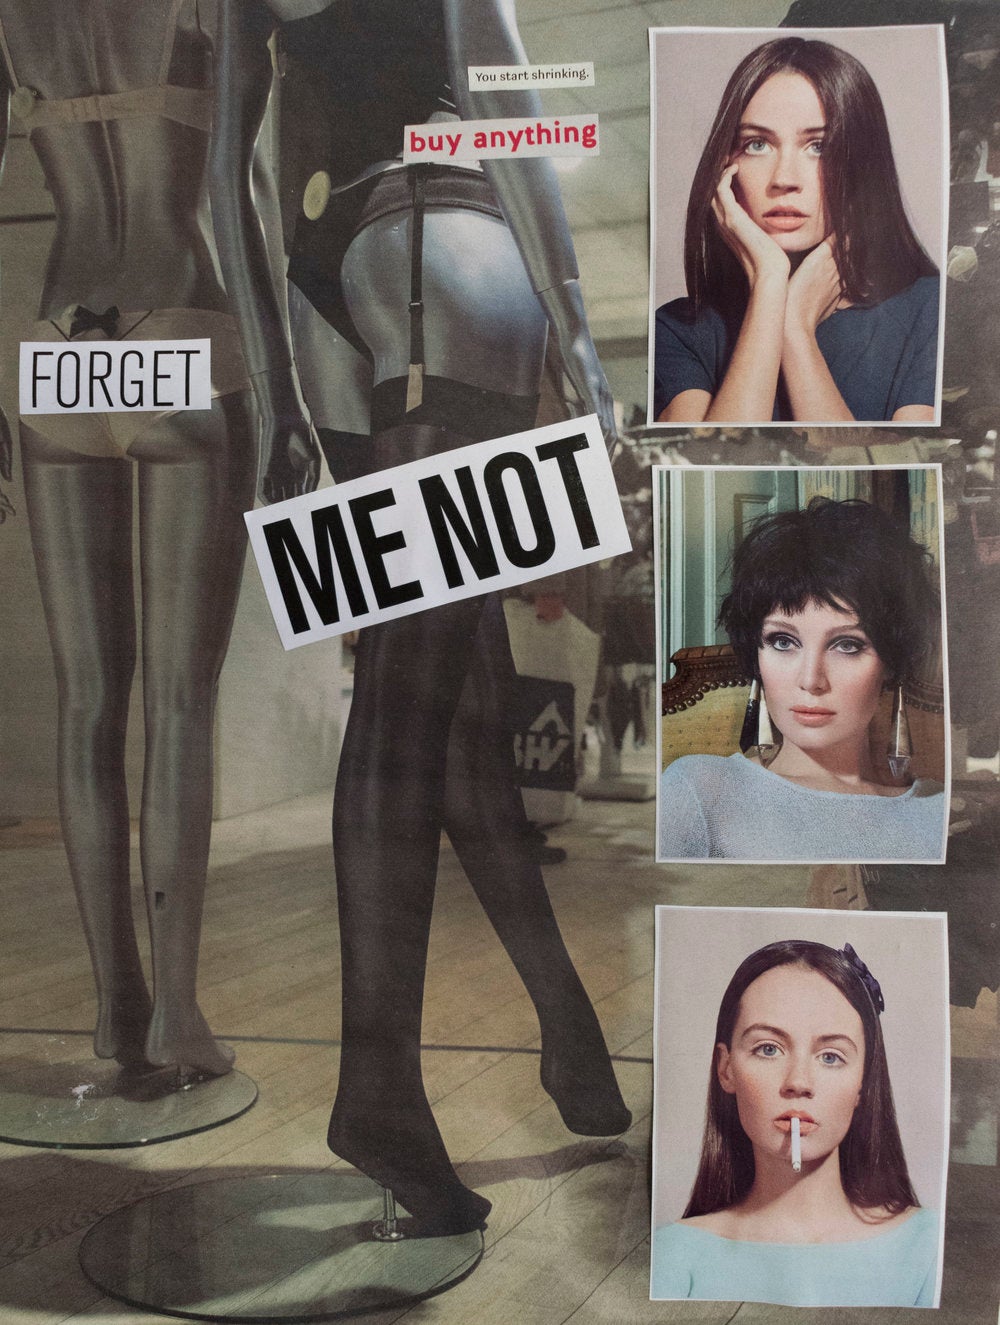 Collage of mannequins in lingerie and two photographs of women on top. Magazine clippings read: "You start shrinking." "buy anything" "FORGET" "ME NOT"